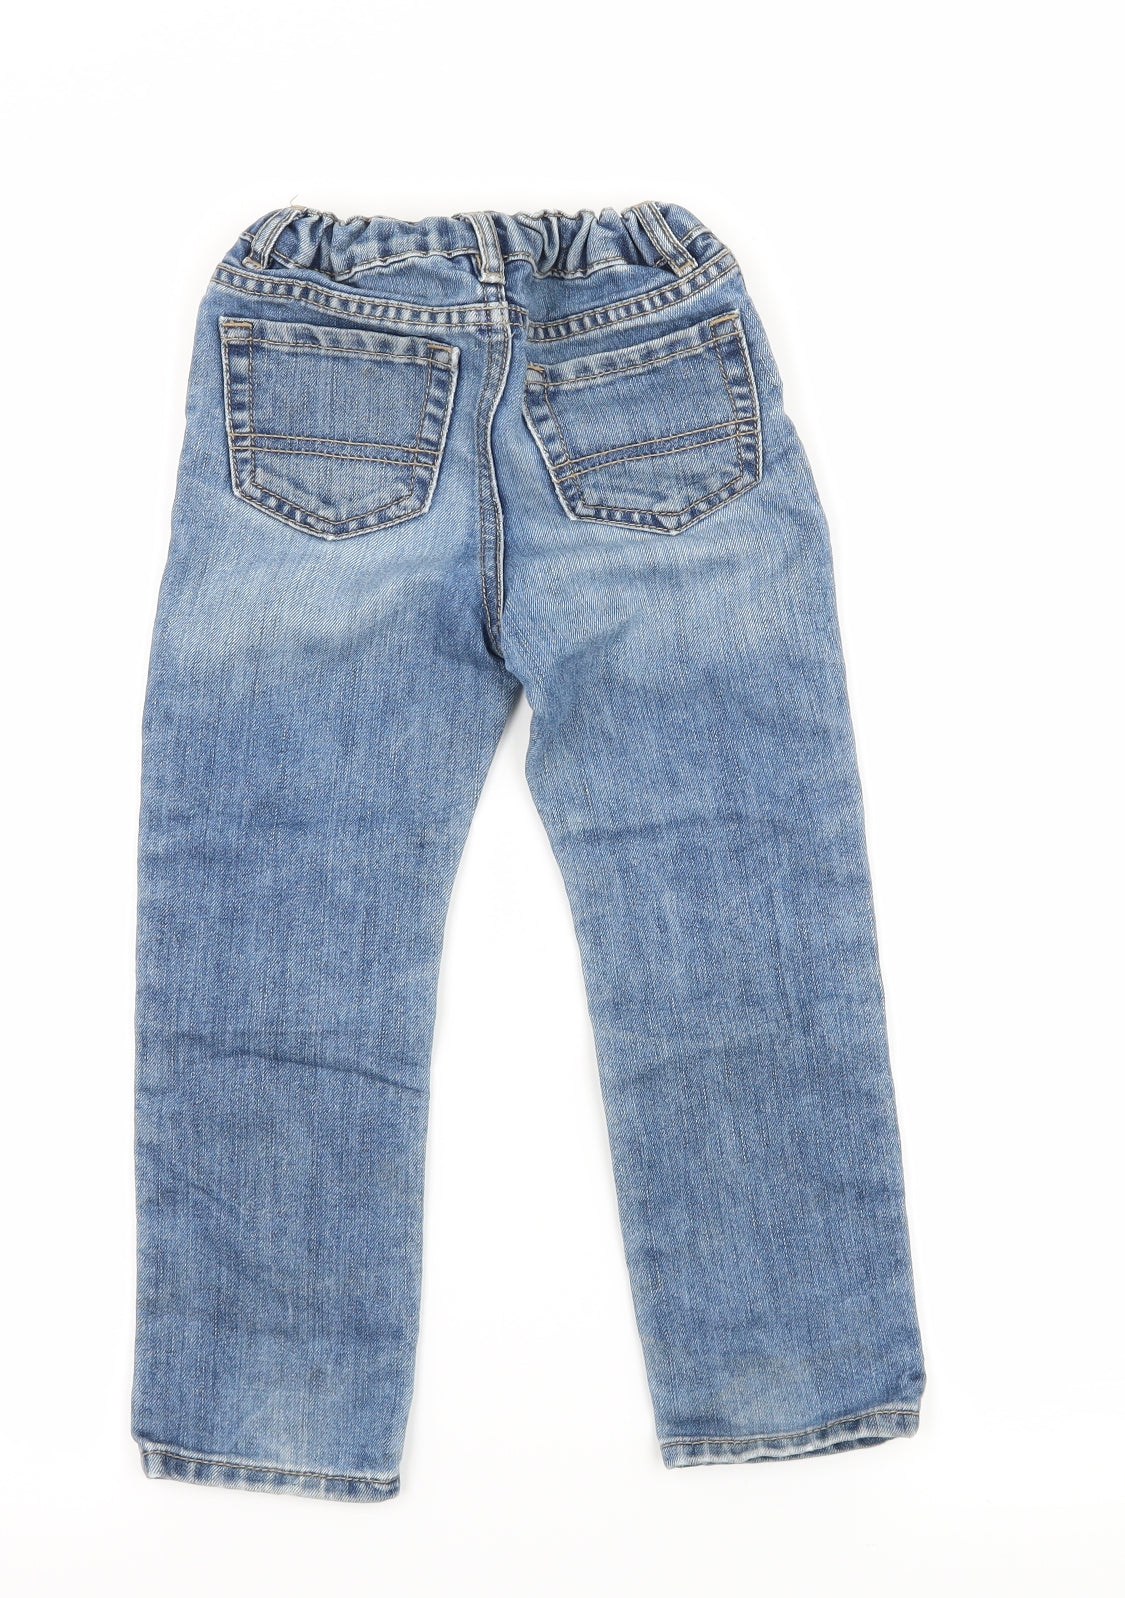 The Children's Place Boys Blue  Denim Skinny Jeans Size 4 Years